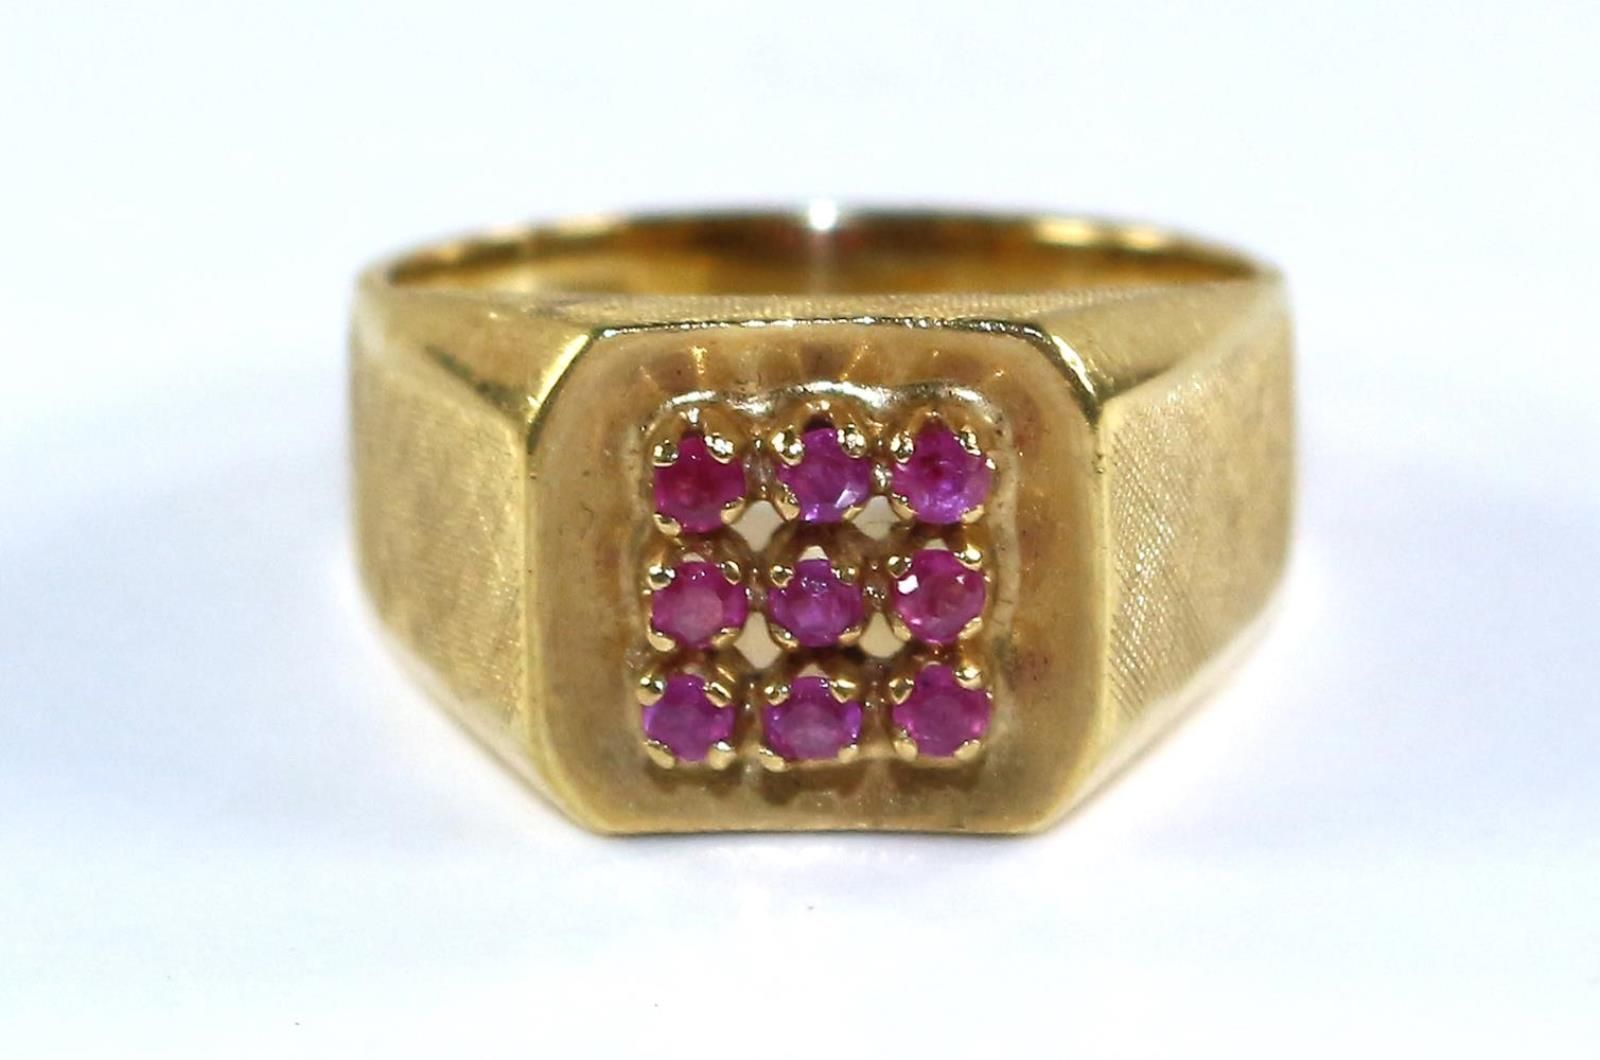 Allesandria 750 GG Rubinring. Italy around 1980. Finely worked jeweler's ring wi&hellip;